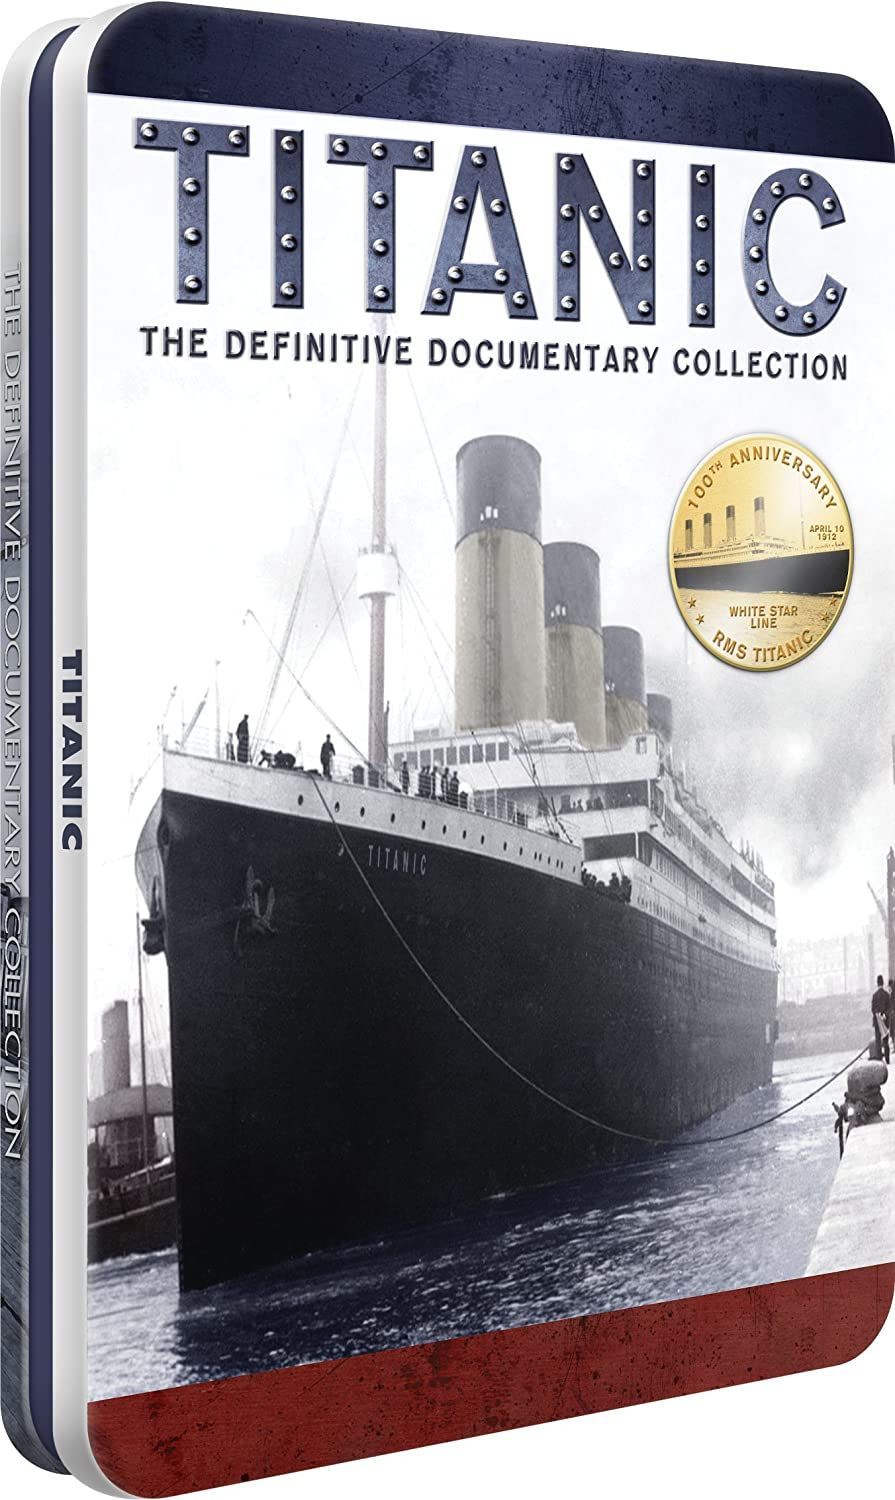 Mill Creek Ent Titanic The Definitive Documentary Collection DVD